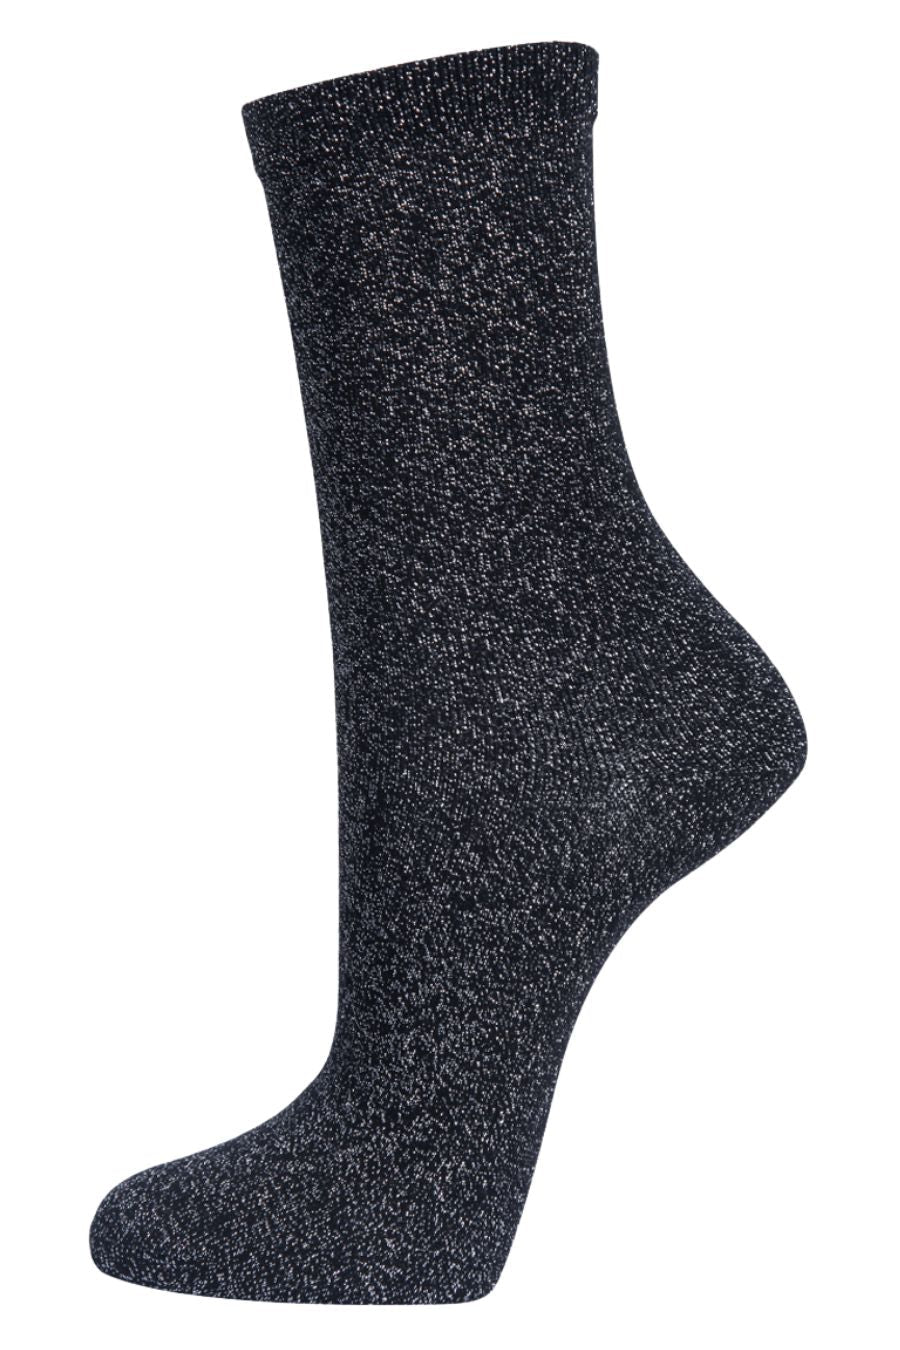 black ankle socks with all over silver glitter effect